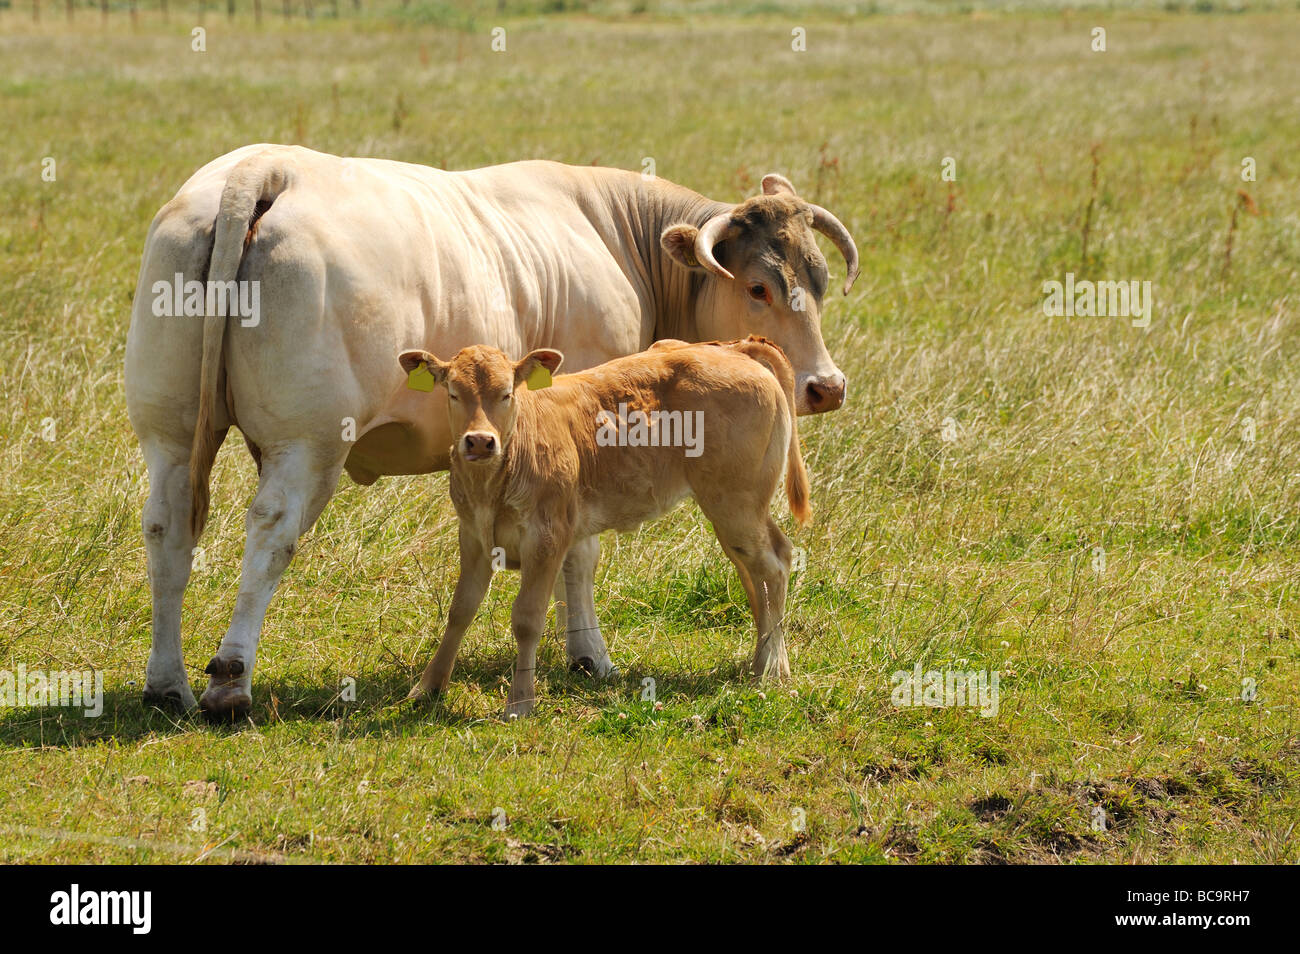 White meat cow with little calf Stock Photo